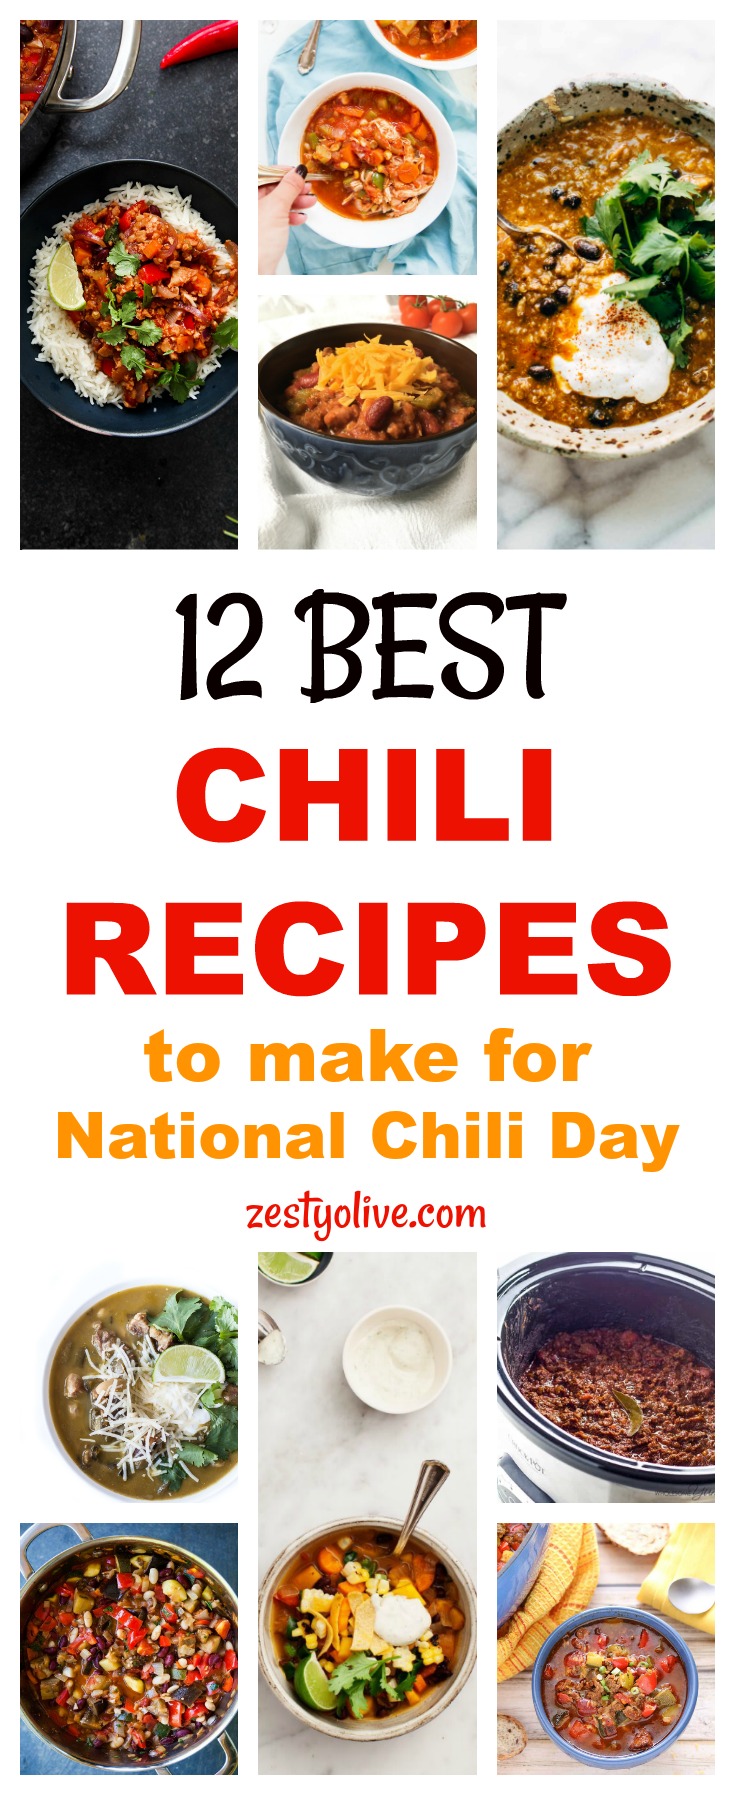 In celebration of National Chili Day, here are 12 of the best chili recipes to consider for your celebration of this day and beyond. Whether you're looking for beef, turkey, pork, vegetarian, keto, easy, slow cooker, dutch oven, or instant pot varieties of chili, you're sure to find one that fits your needs right here.